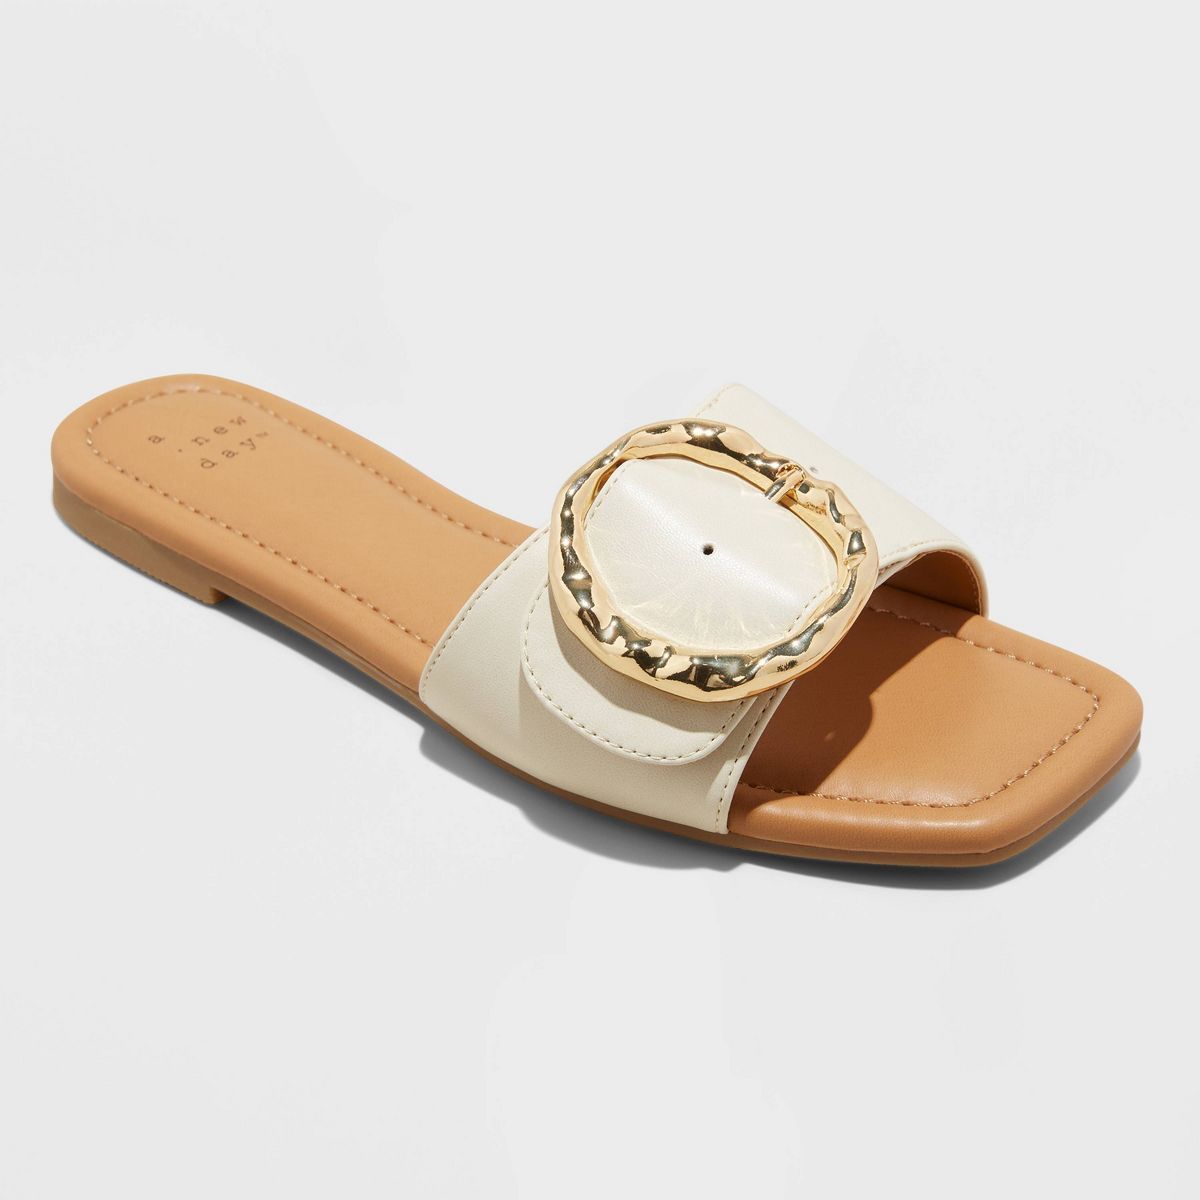 Women's Bennie Buckle Slide Sandals with Memory Foam Insole - A New Day™ Cream 7 | Target